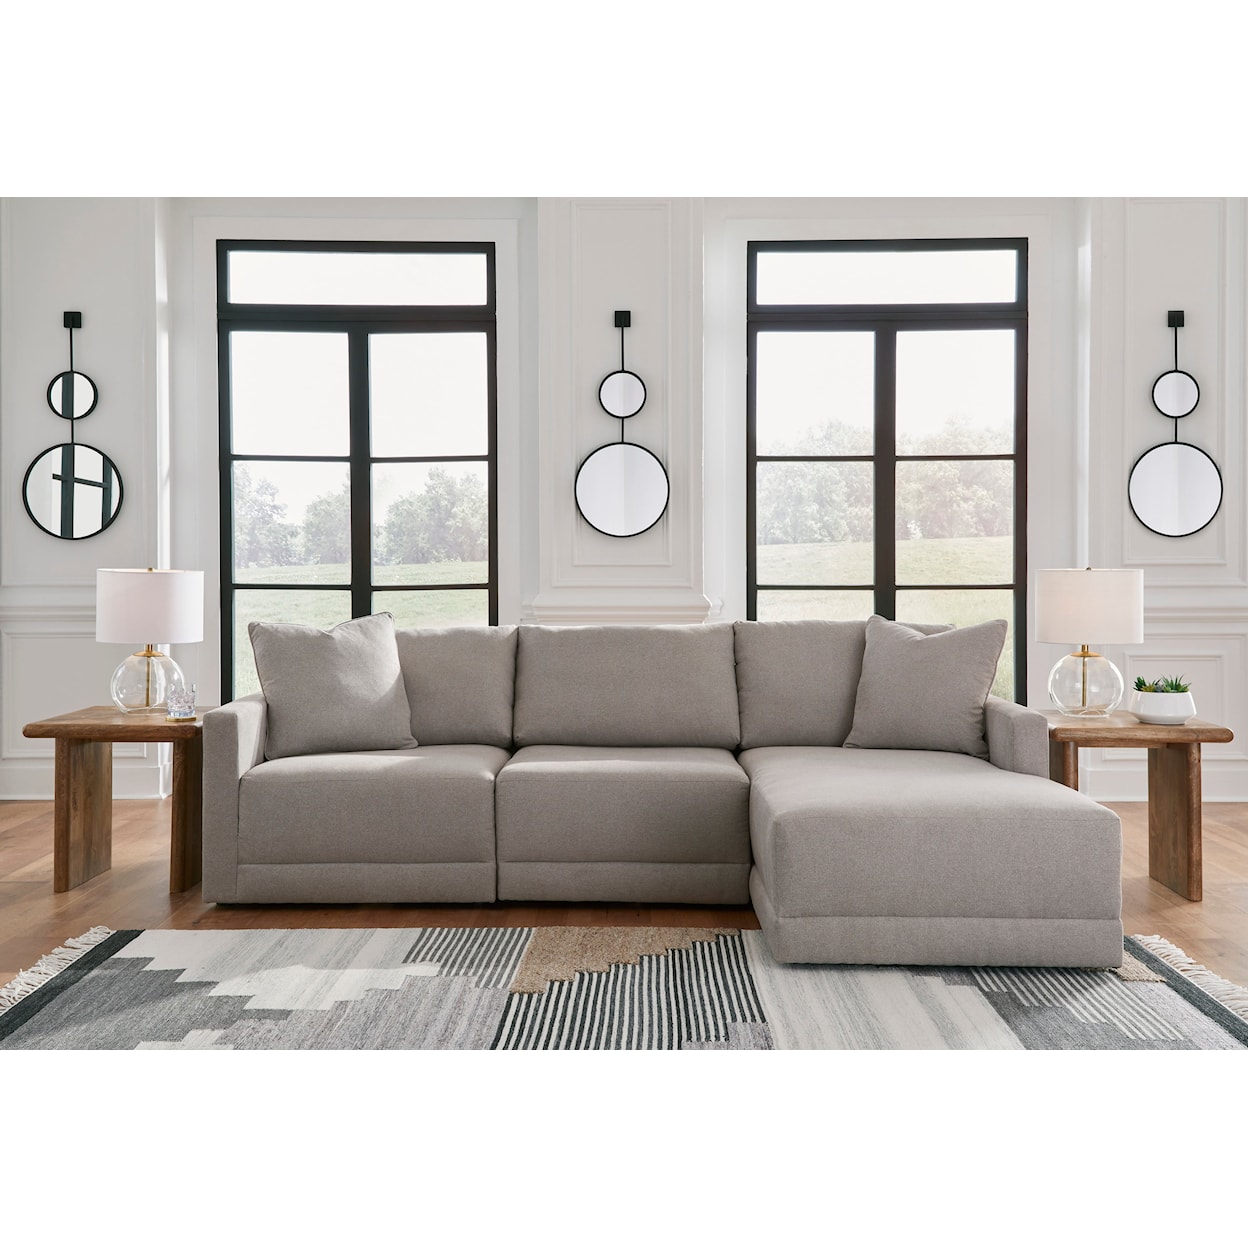 JB King Katany 3-Piece Sectional with Chaise